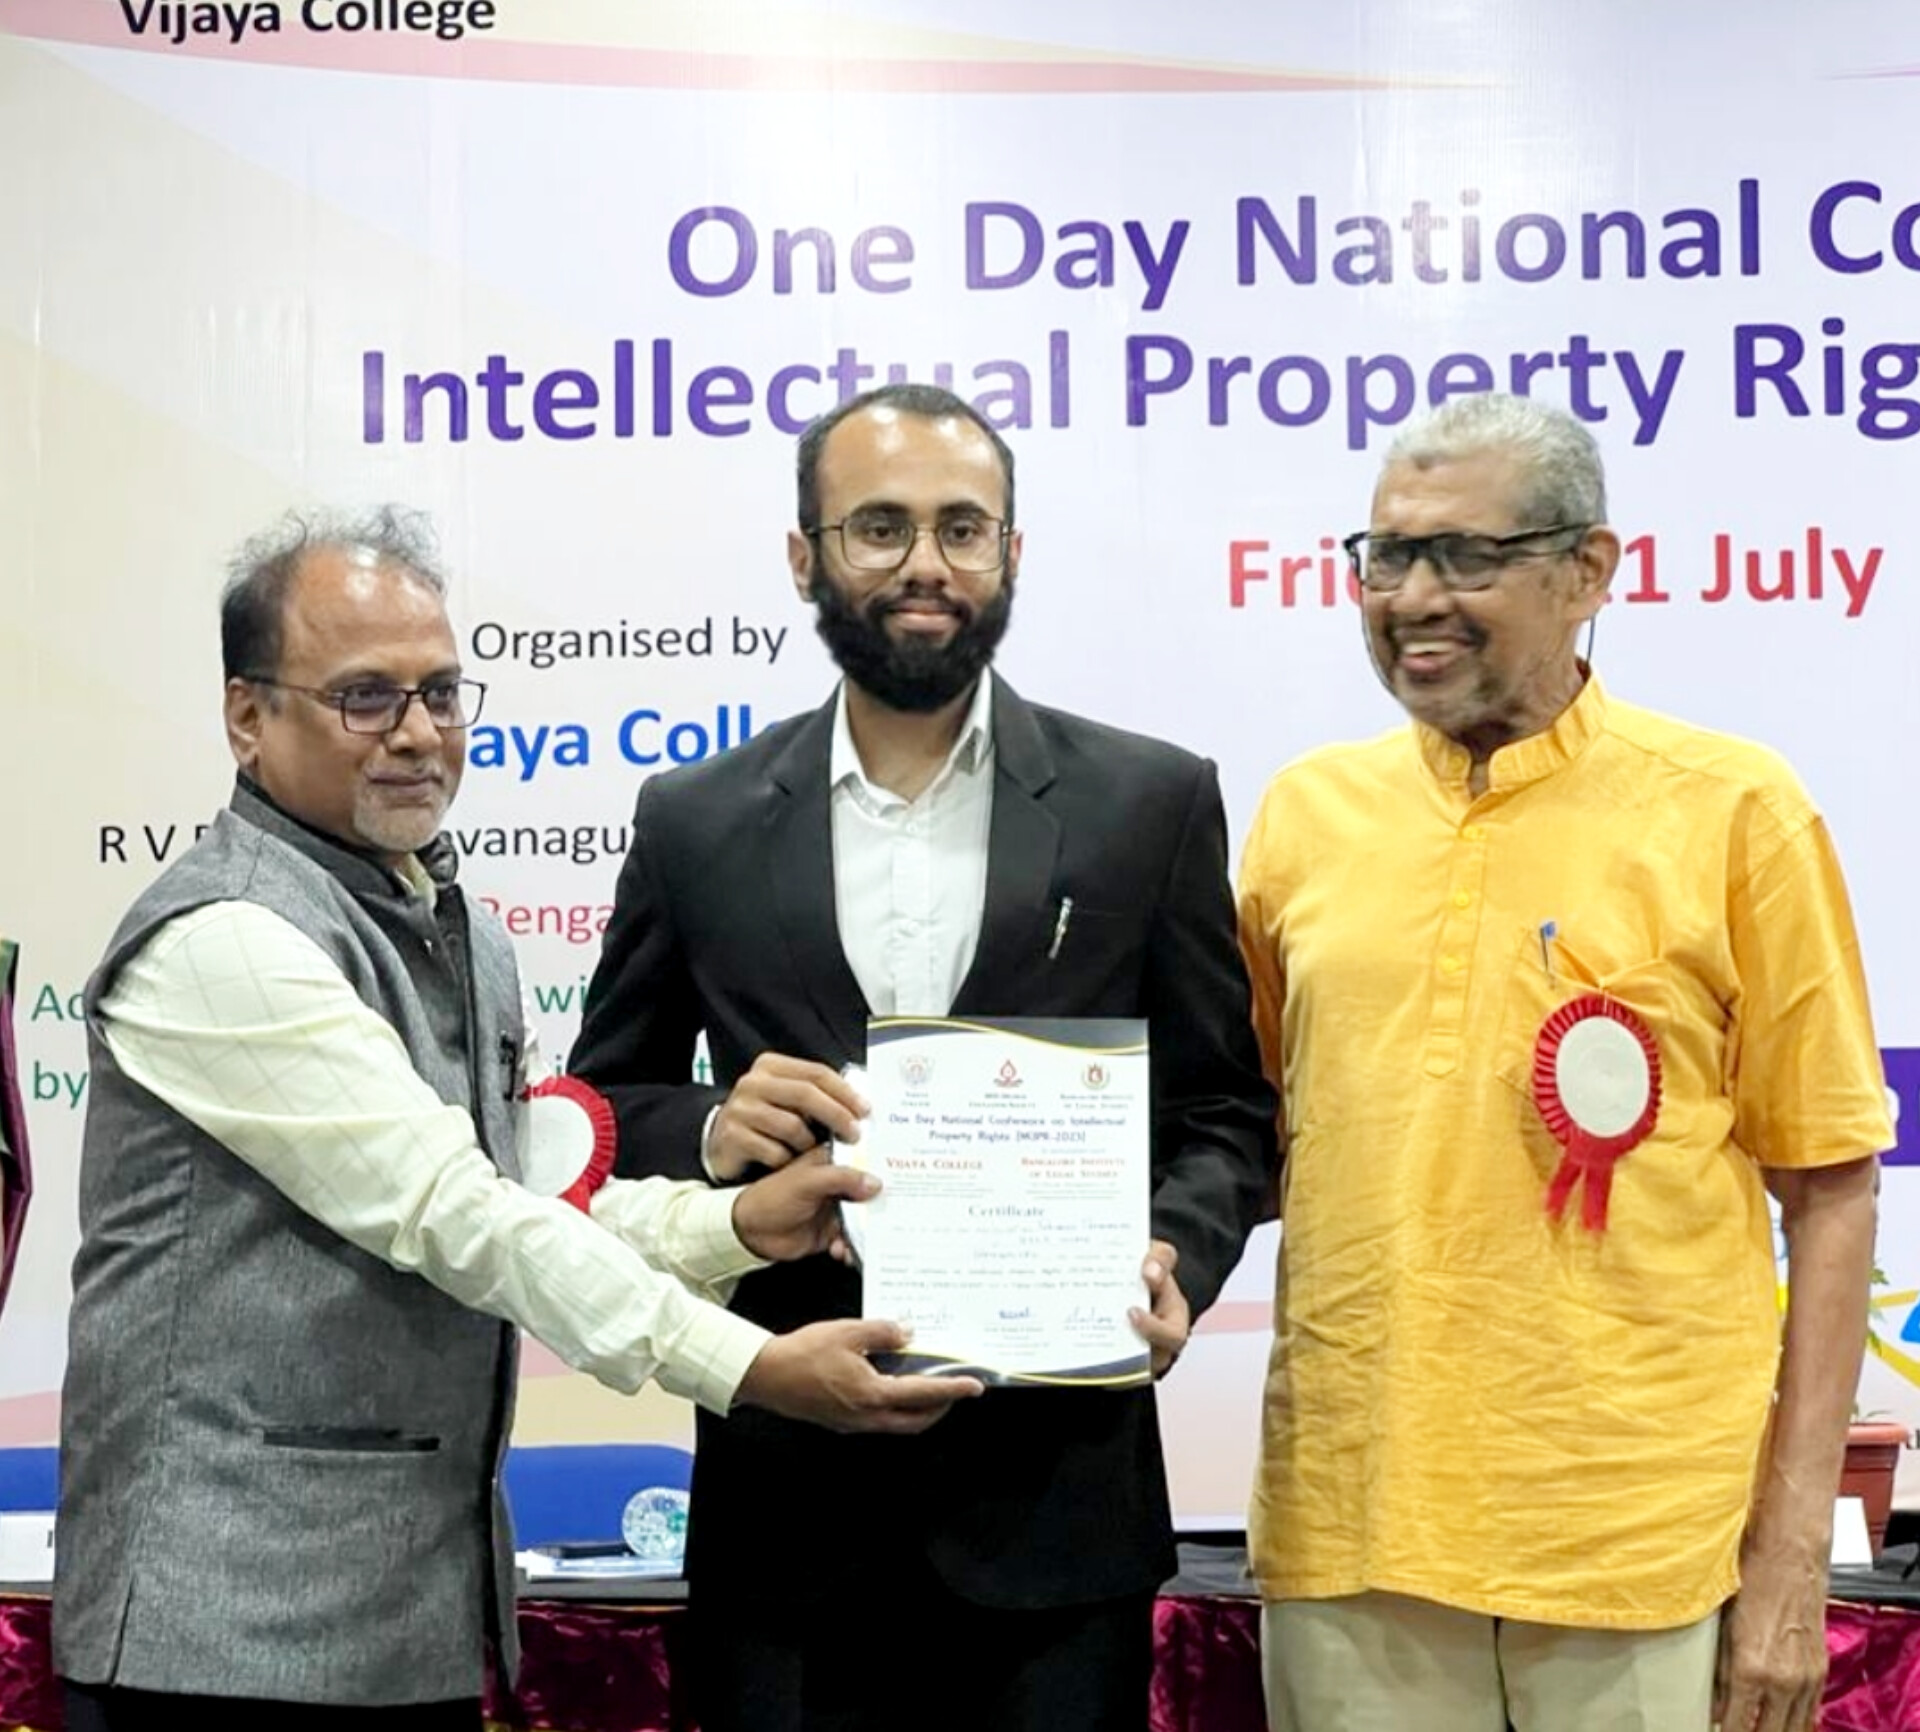 "Mr. Pranesh Prabhakar, 3rd year received Best Paper Presenter award at the One Day National Conference on Intellectual Property Rights held on July 21st 2023"